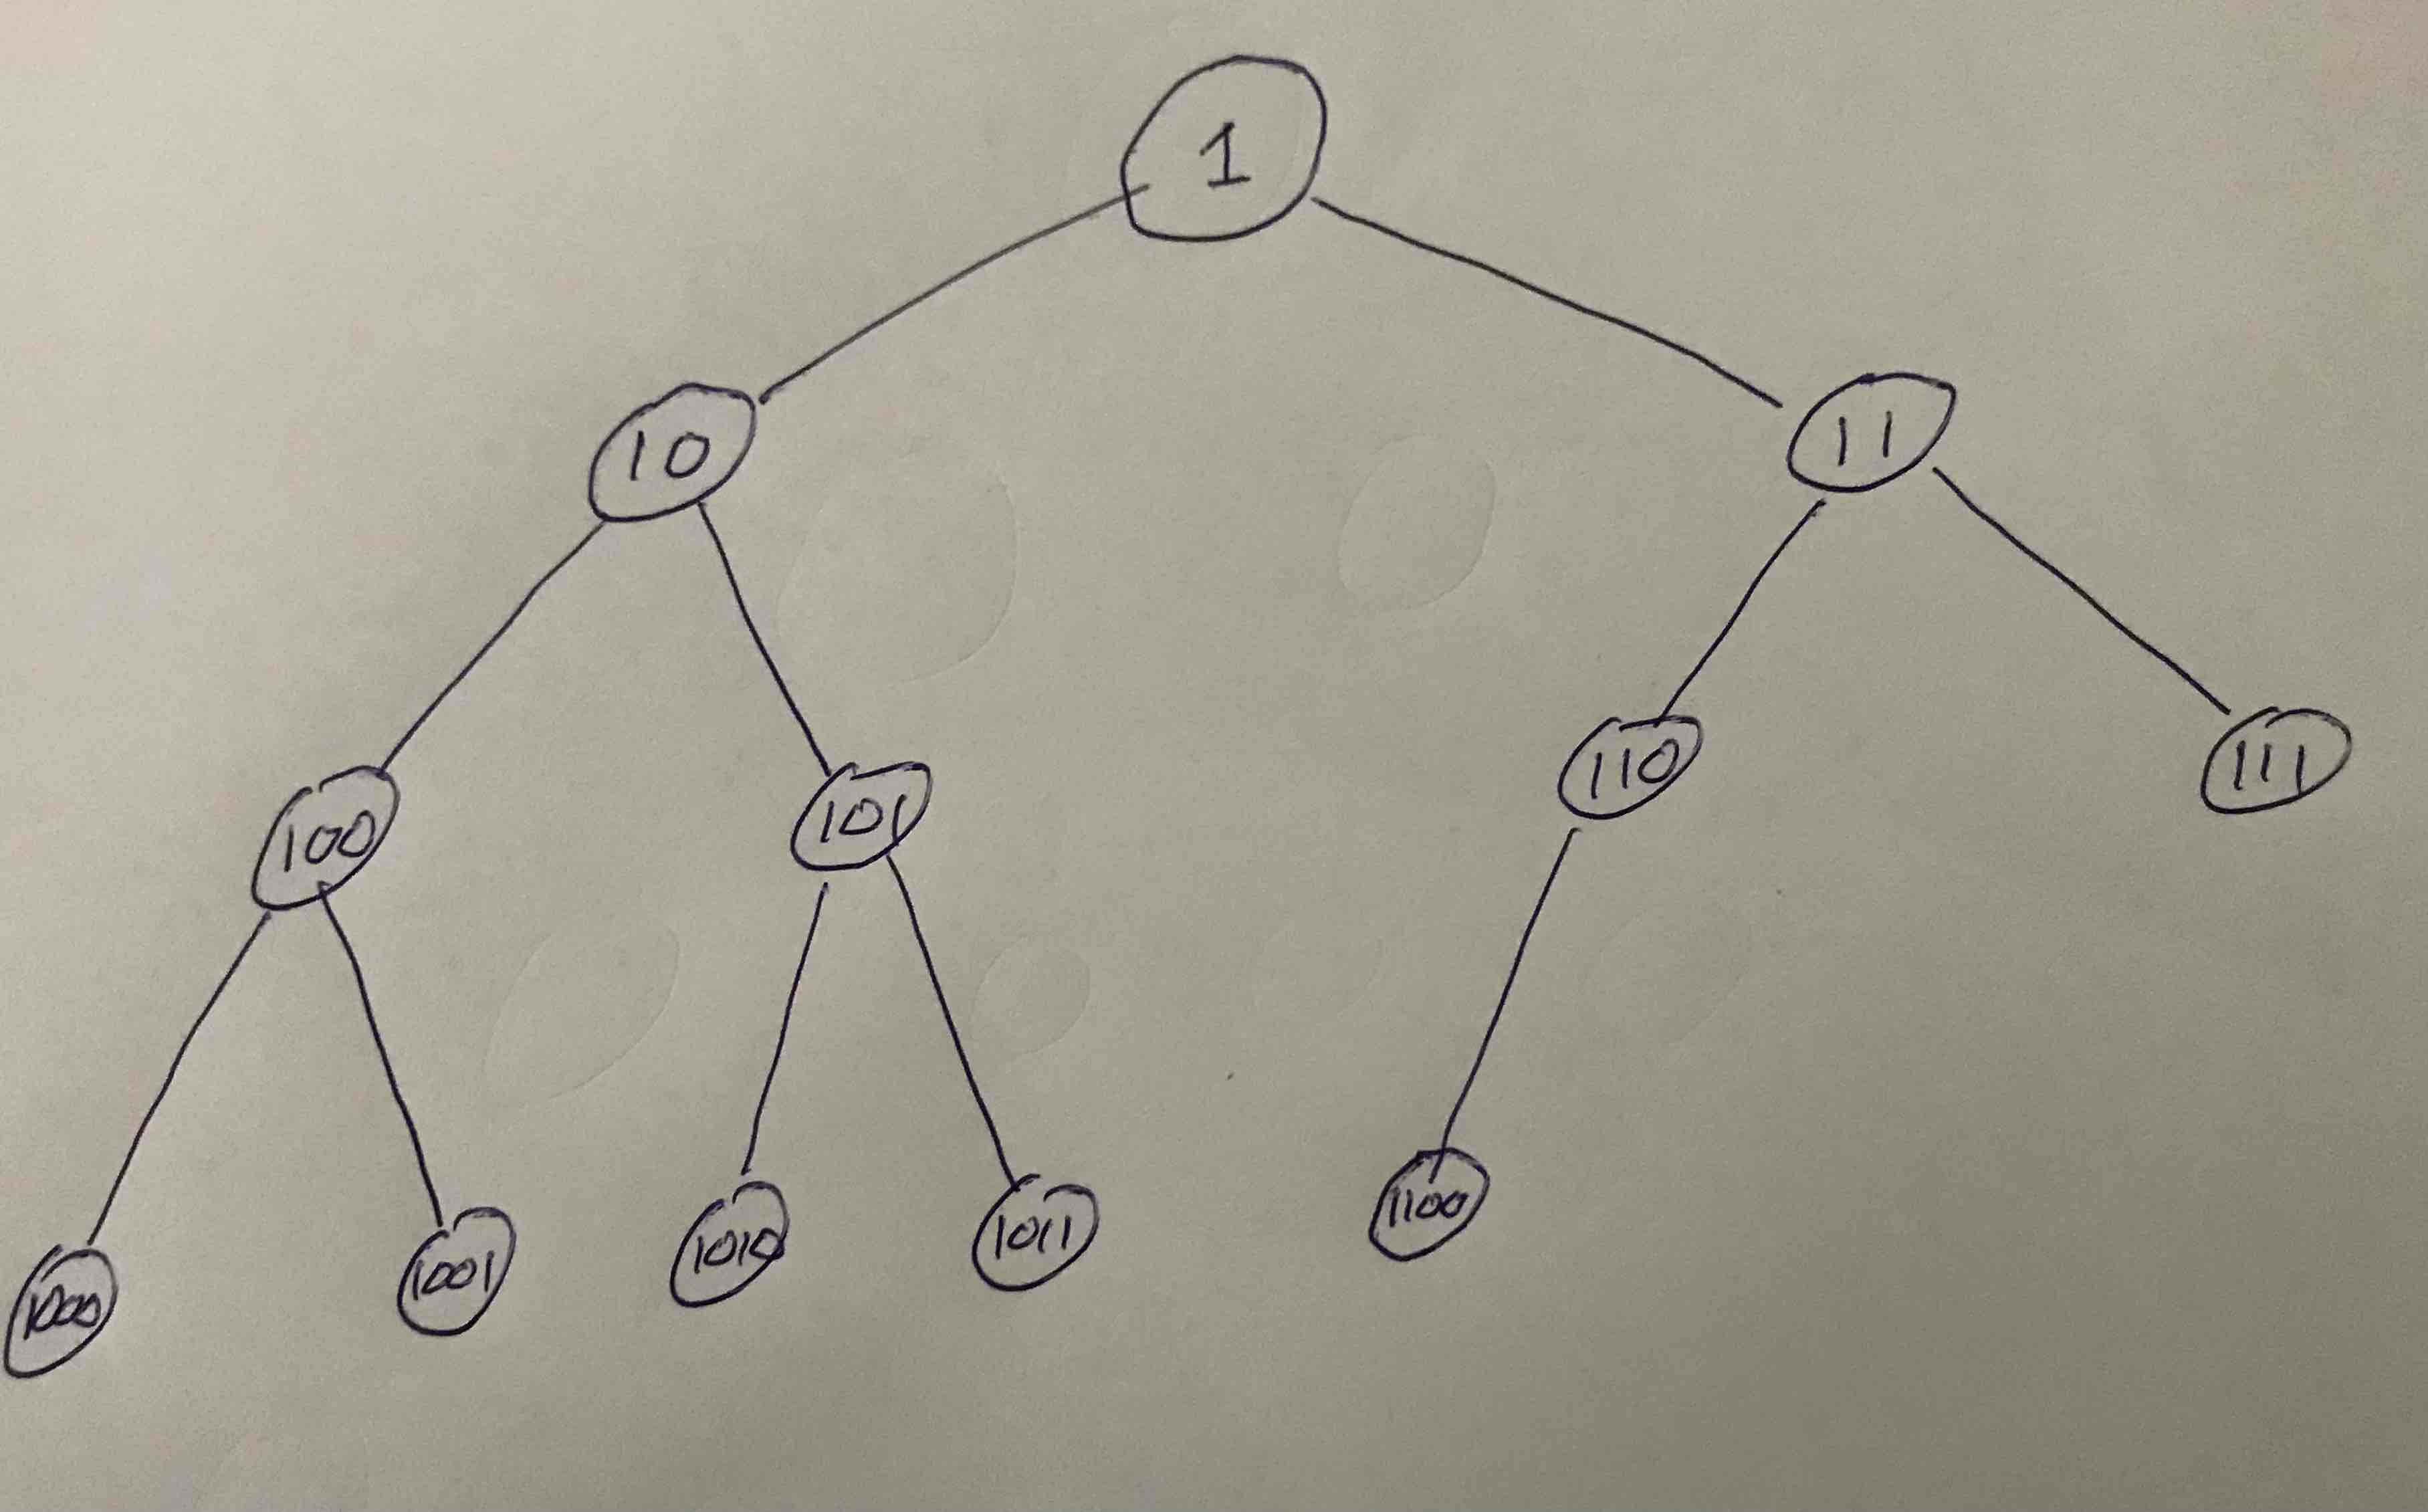 Almost Complete Binary Tree